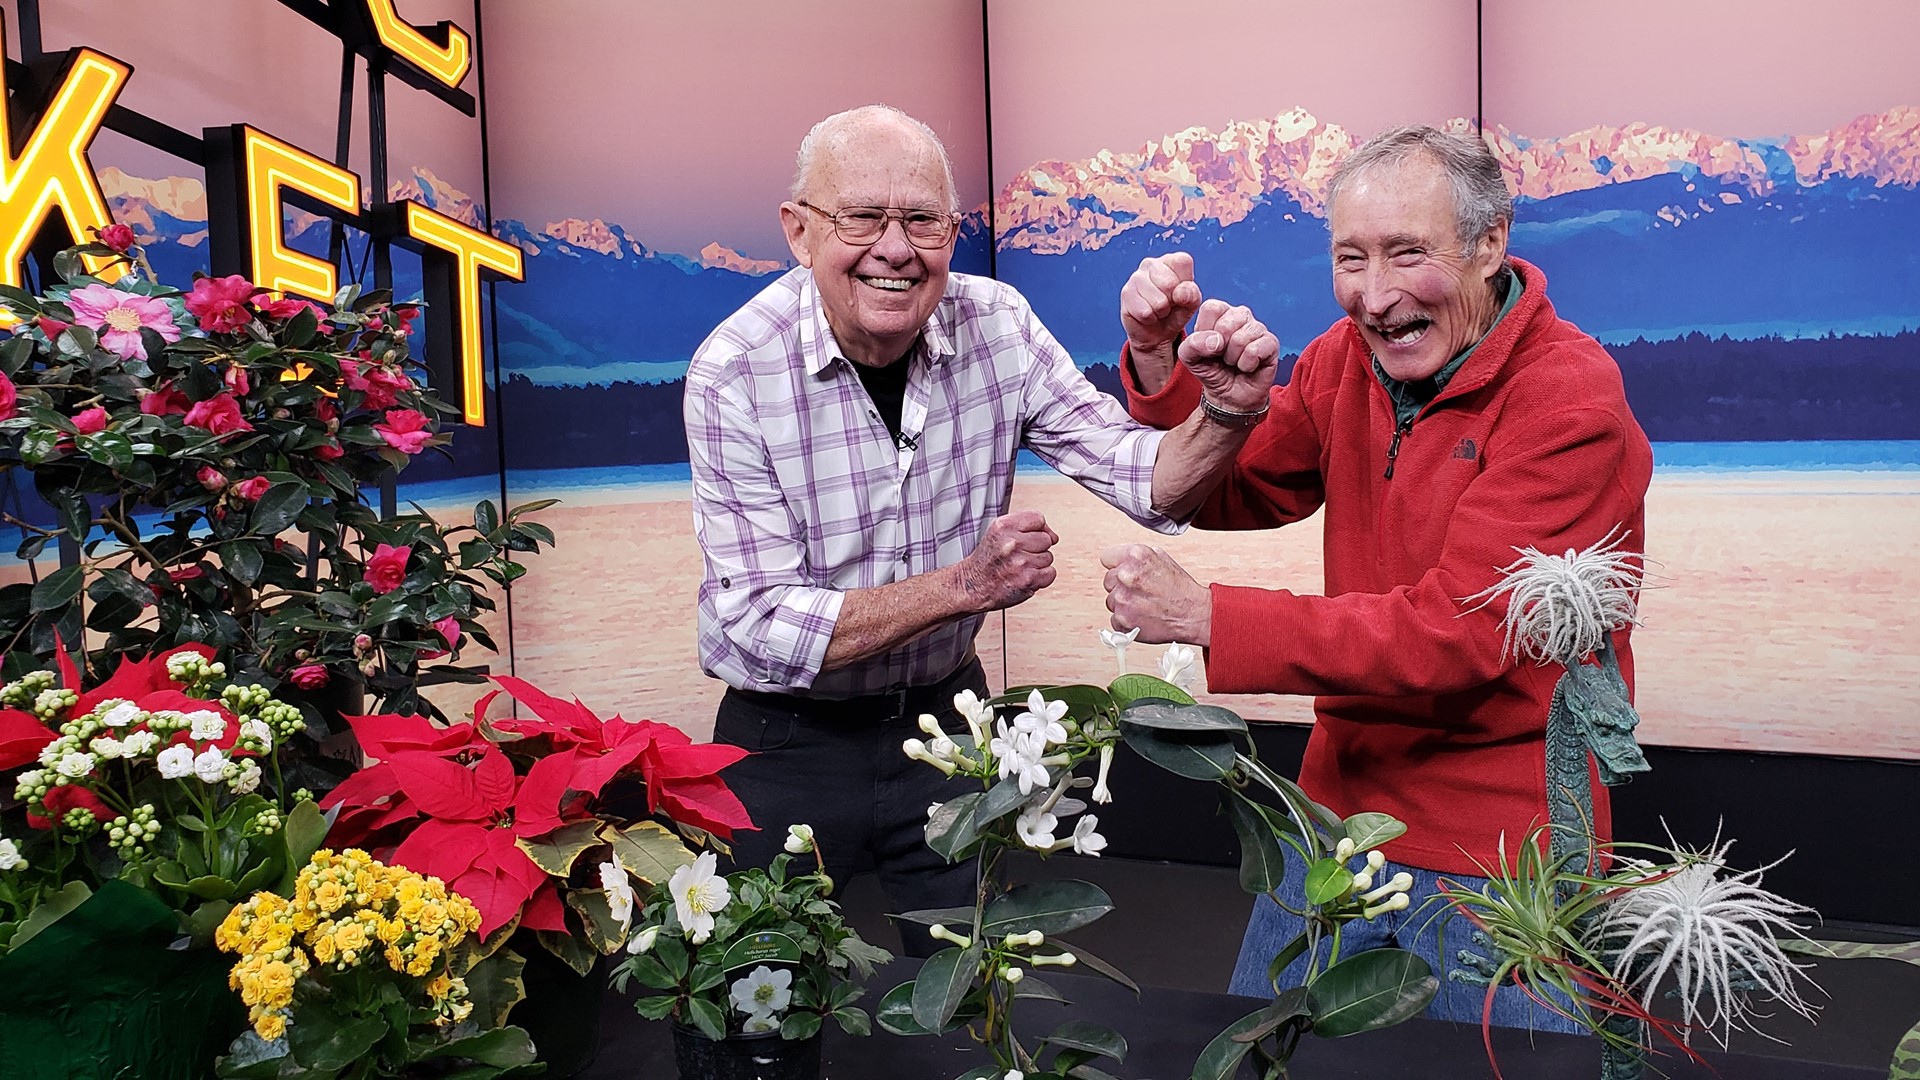 They're back and going head to head! Which gardening extraordinaire has the best ideas when it comes to gifting plants this holiday season?